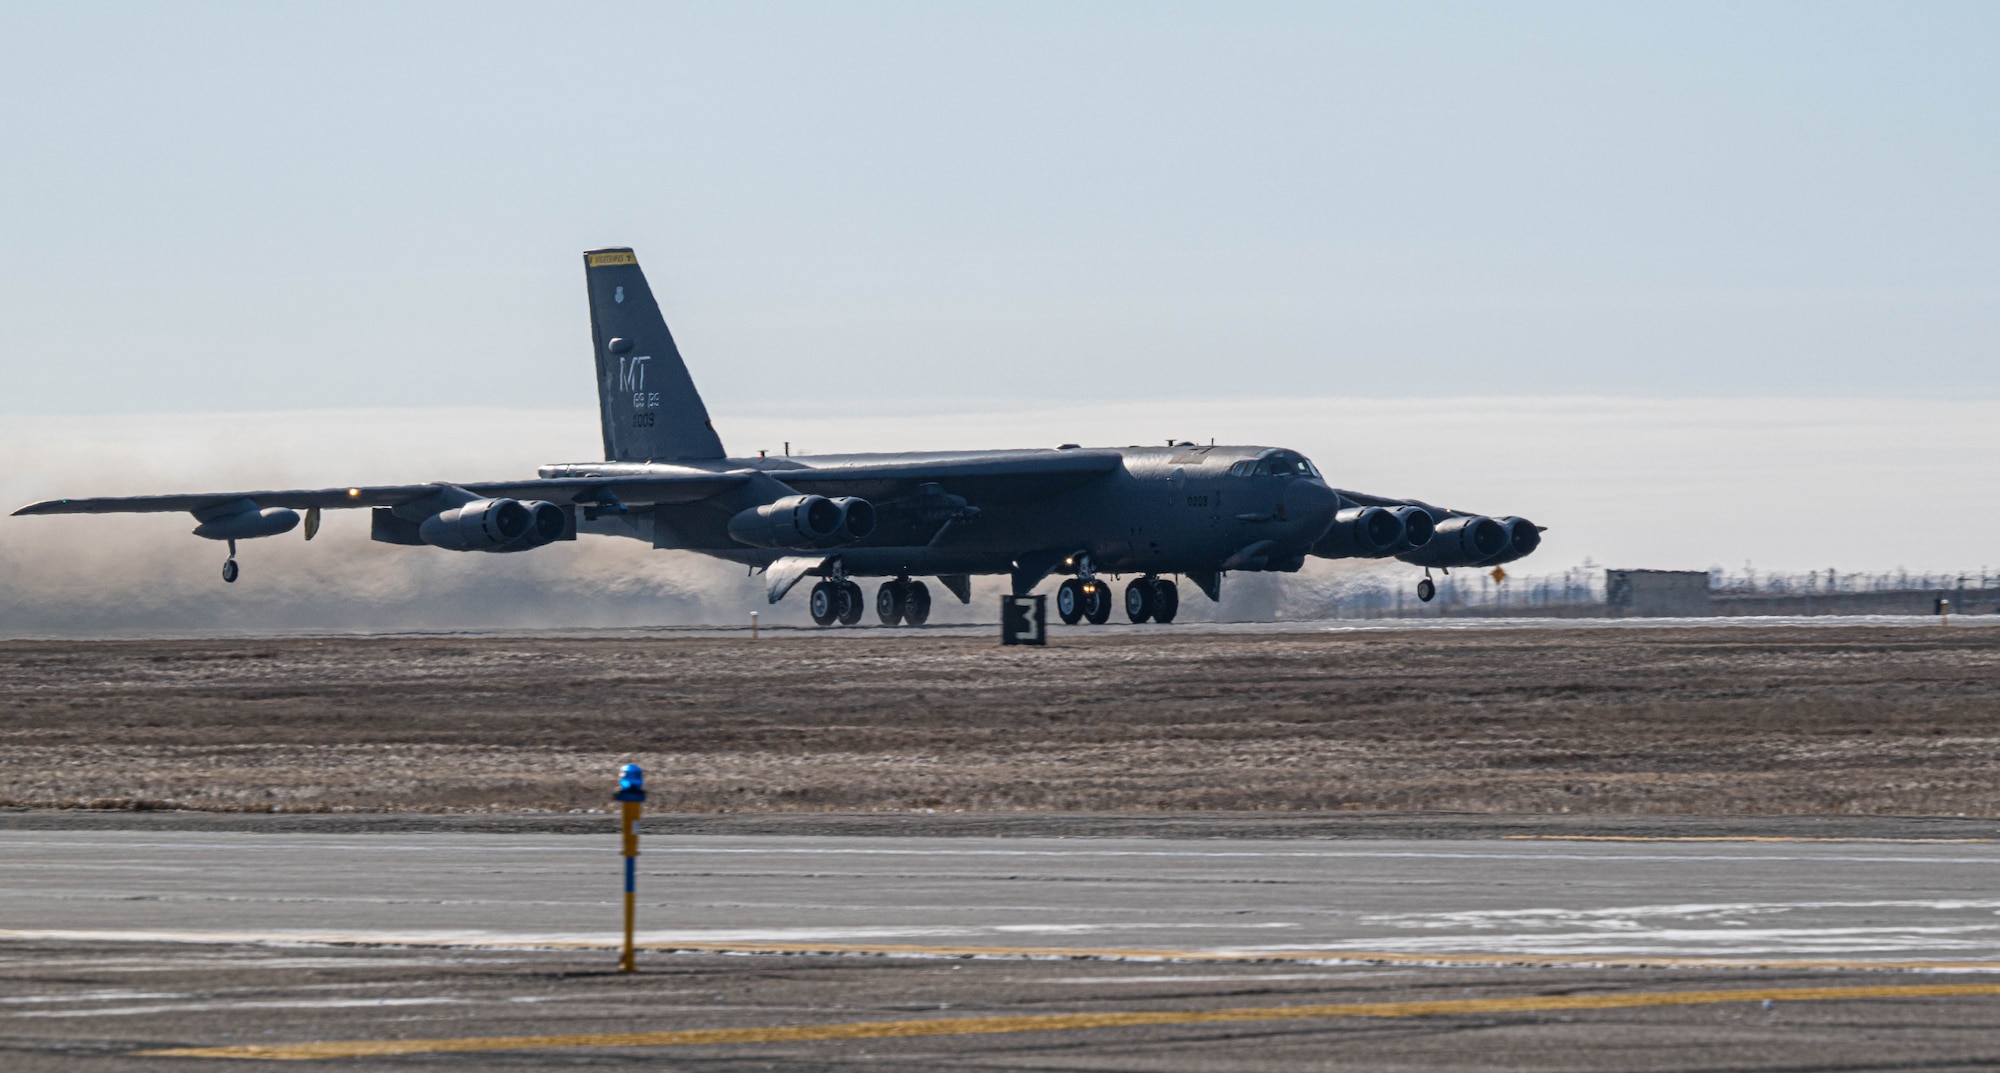 A U.S. Air Force B-52H Stratofortress assigned to the 69th Bomb Squadron, takes off from the runway at Minot Air Force Base, North Dakota, Feb. 28, 2024. Each of the B-52’s eight engines is capable of producing up to 17,000 pounds of thrust; allowing it to fly at high subsonic speeds at altitudes of up to 50,000 feet, while carrying a payload of up to 70,000 pounds. (U.S. Air Force photo by Airman 1st Class Kyle Wilson)